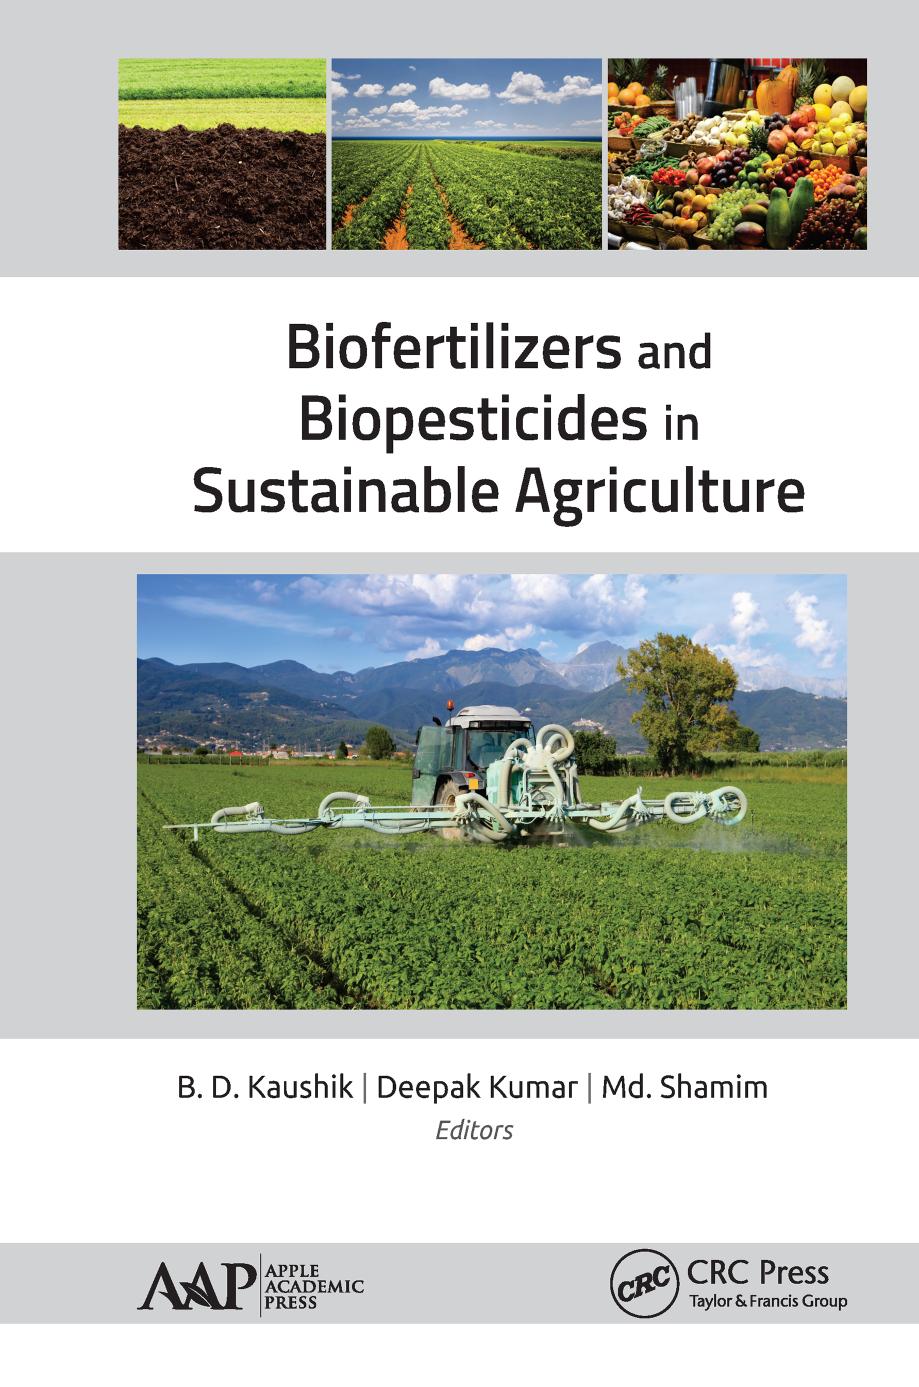 Biofertilizers and Biopesticides in Sustainable Agriculture